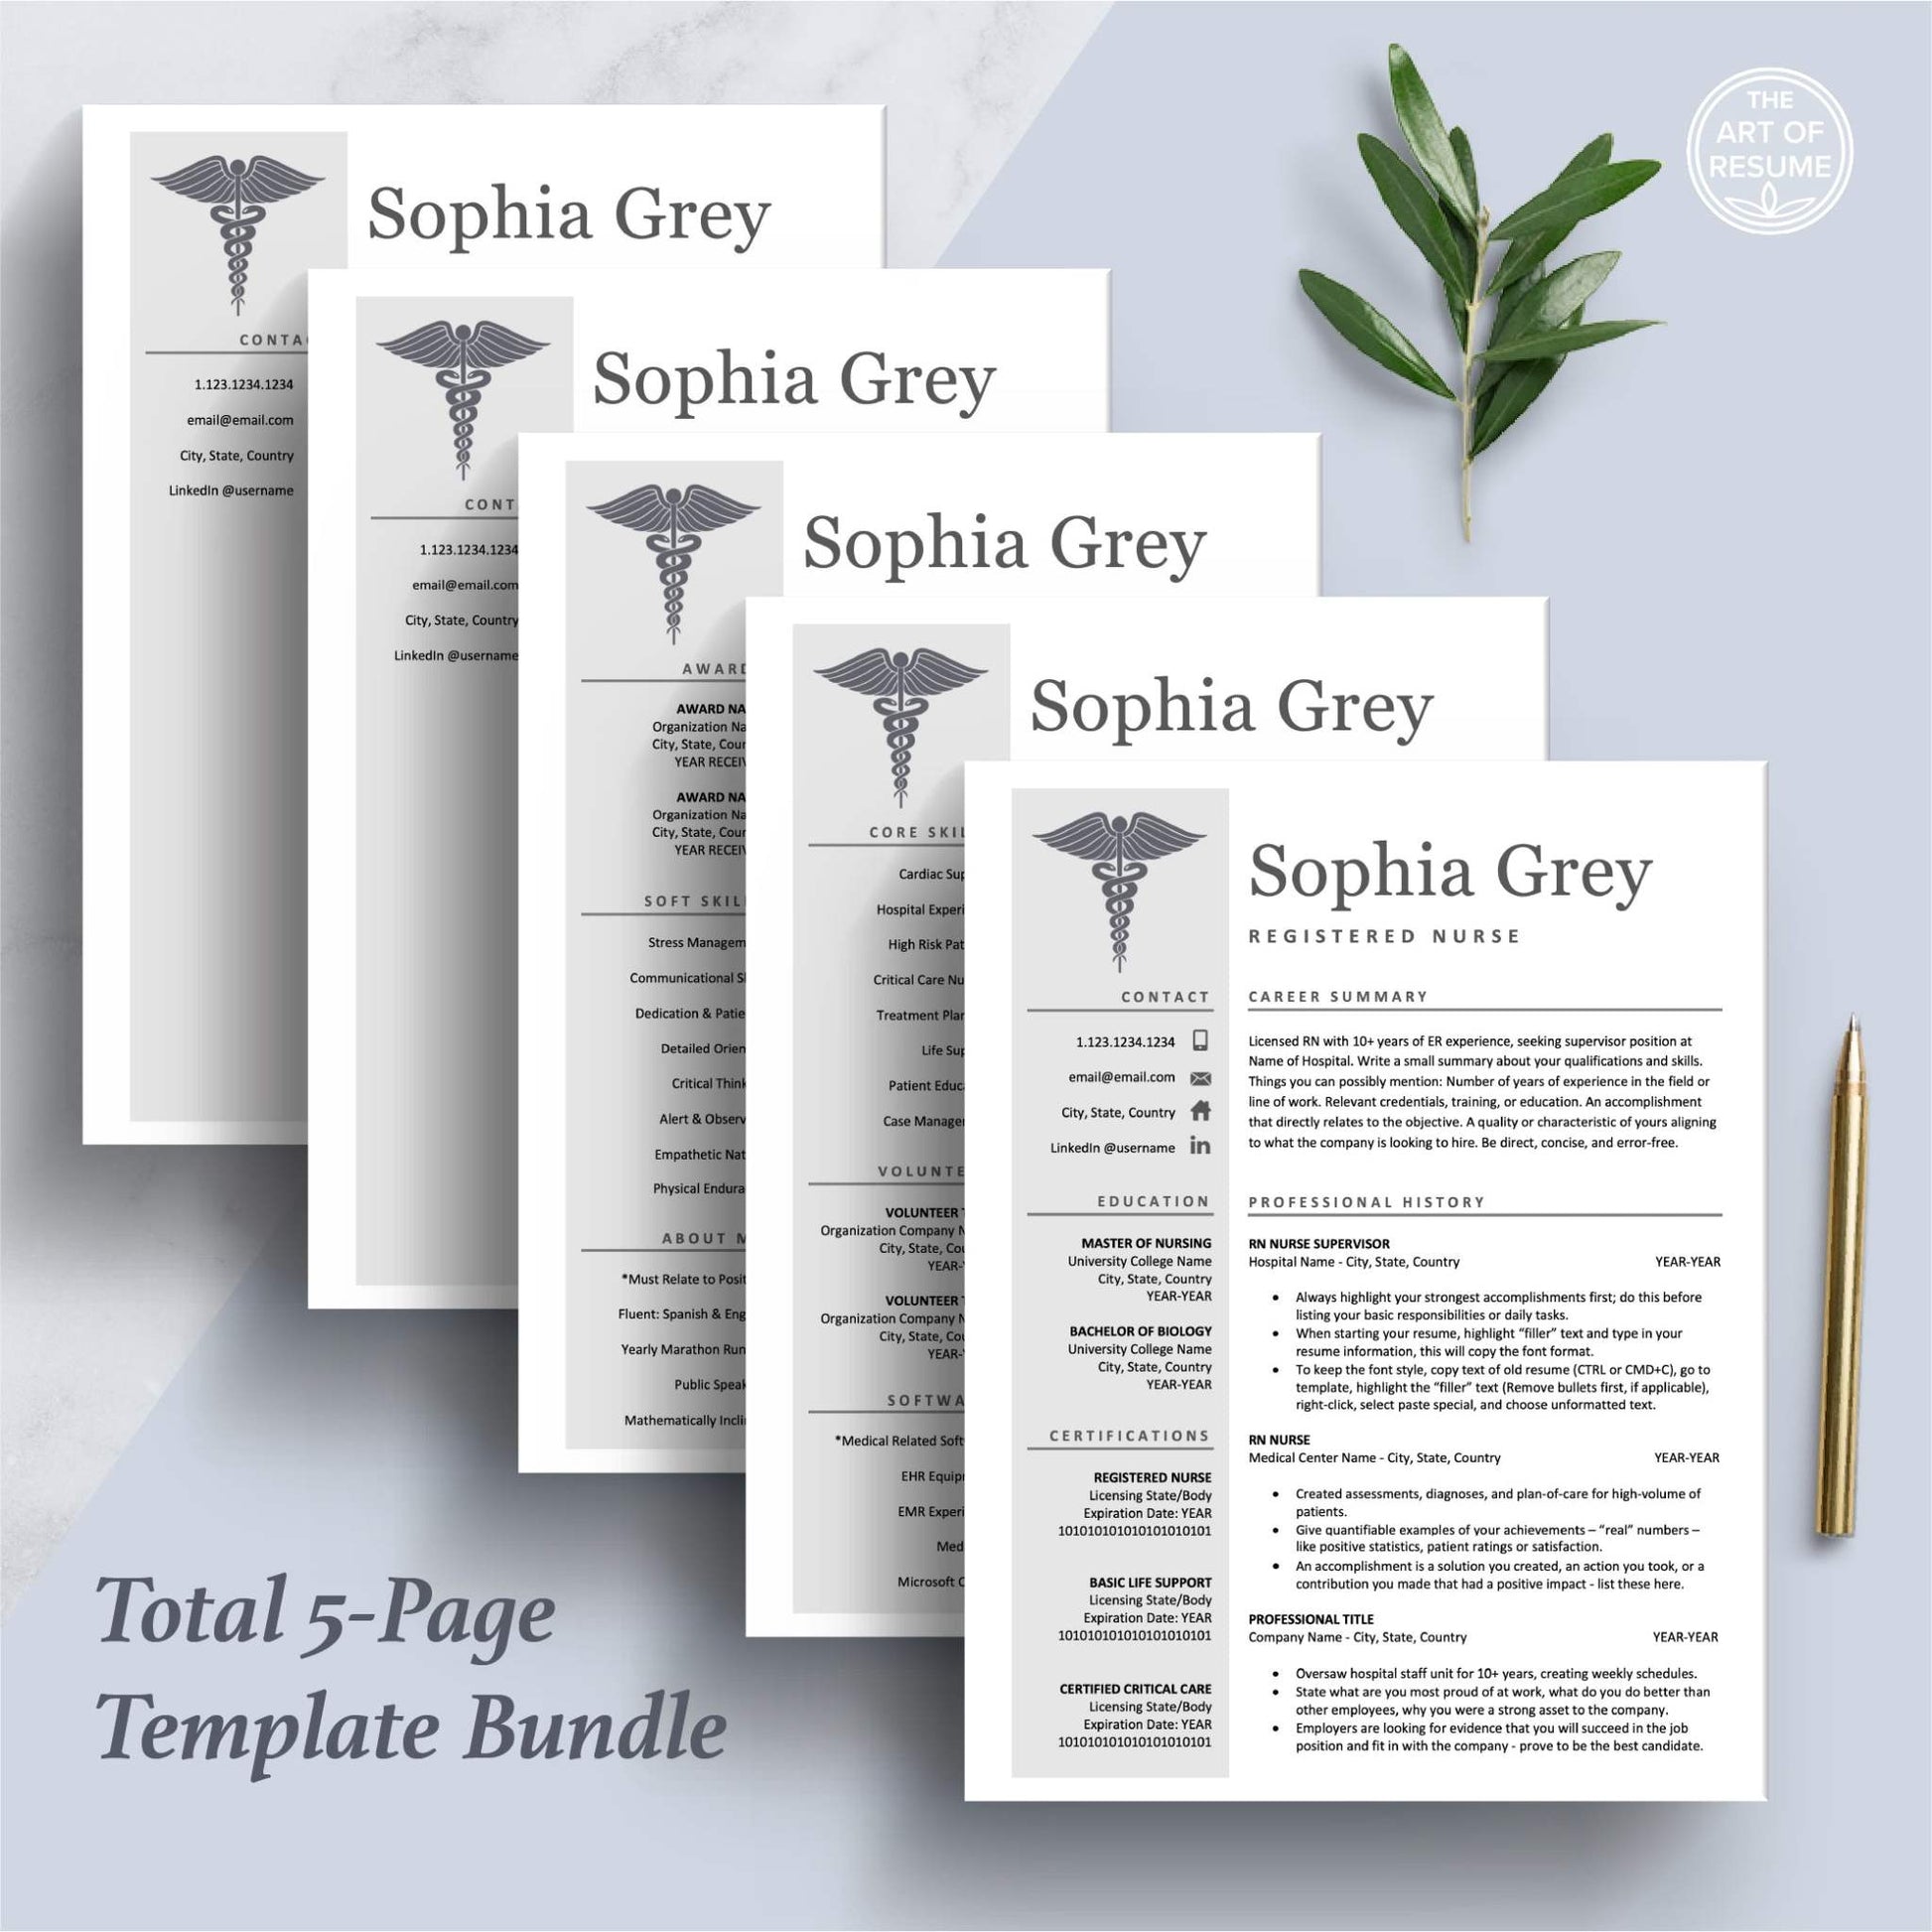 The Art of Resume Templates | Medical, Nurse, Doctor Resume CV Design Bundle including matching cover letter and reference page